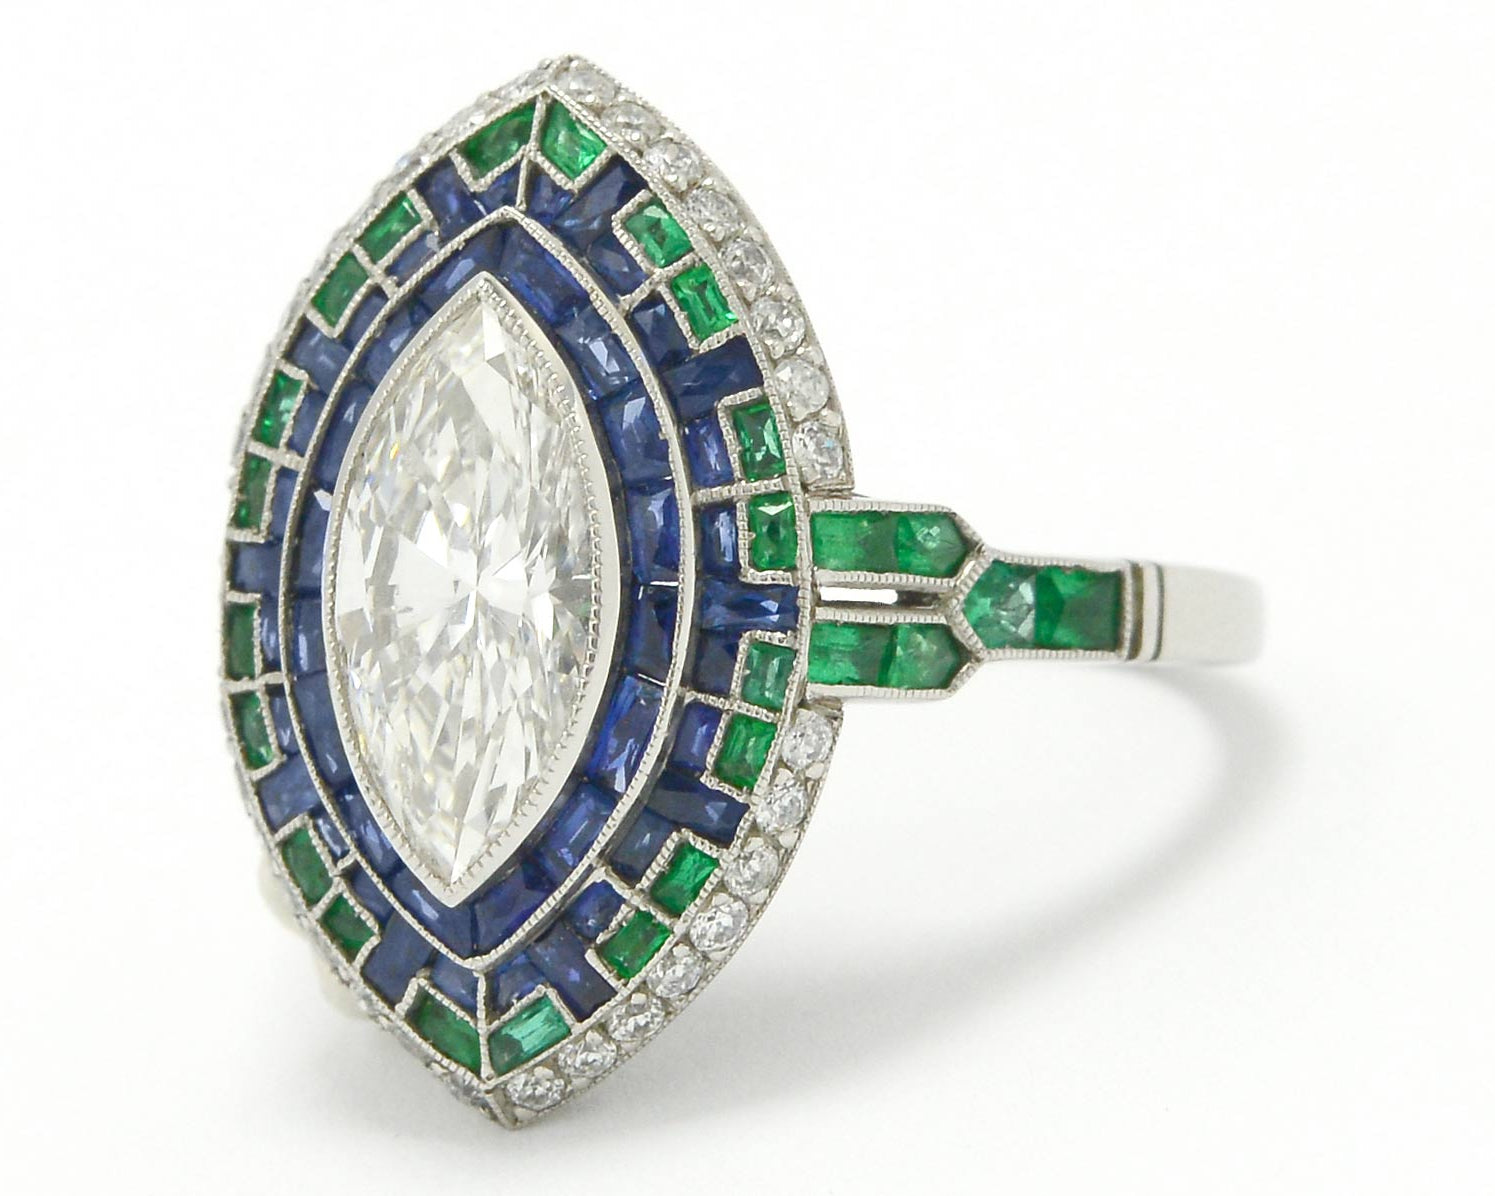 This unique Art Deco style mosaic engagement ring has over 4 carats of gems.